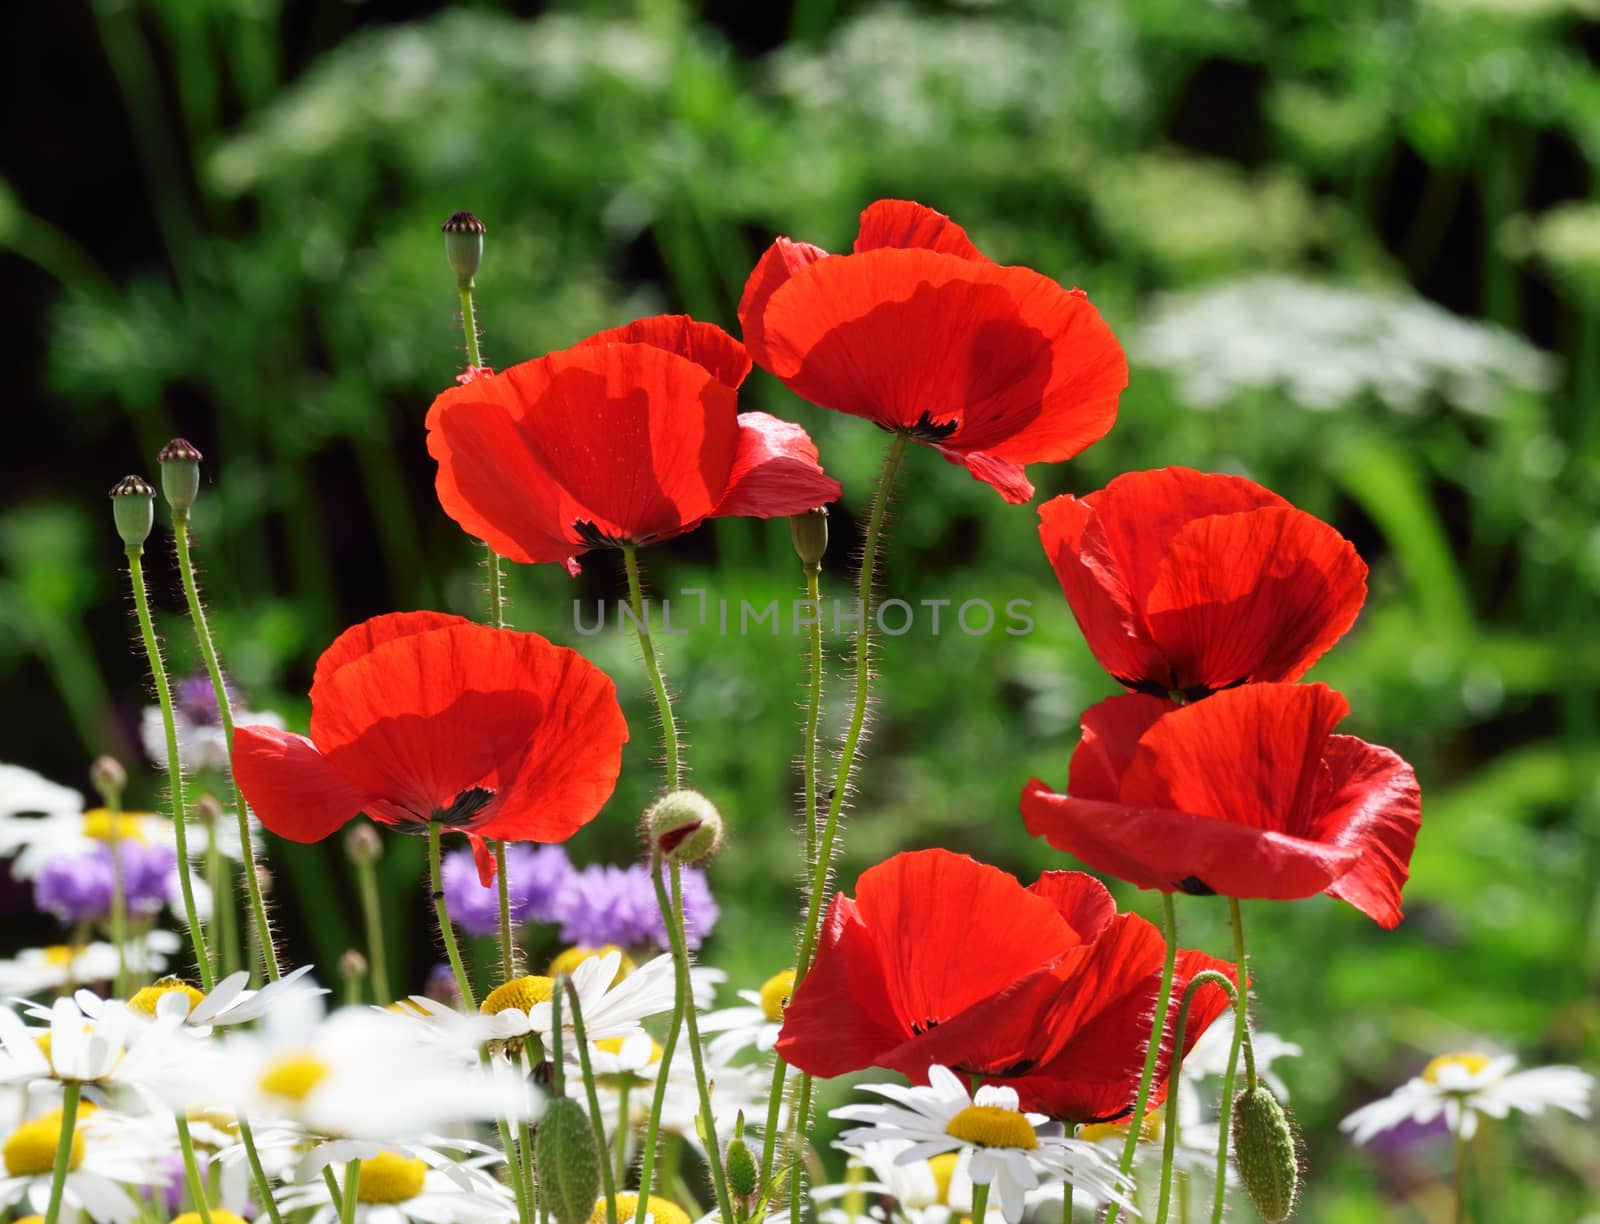 Red Poppy and daisy. by george_stevenson